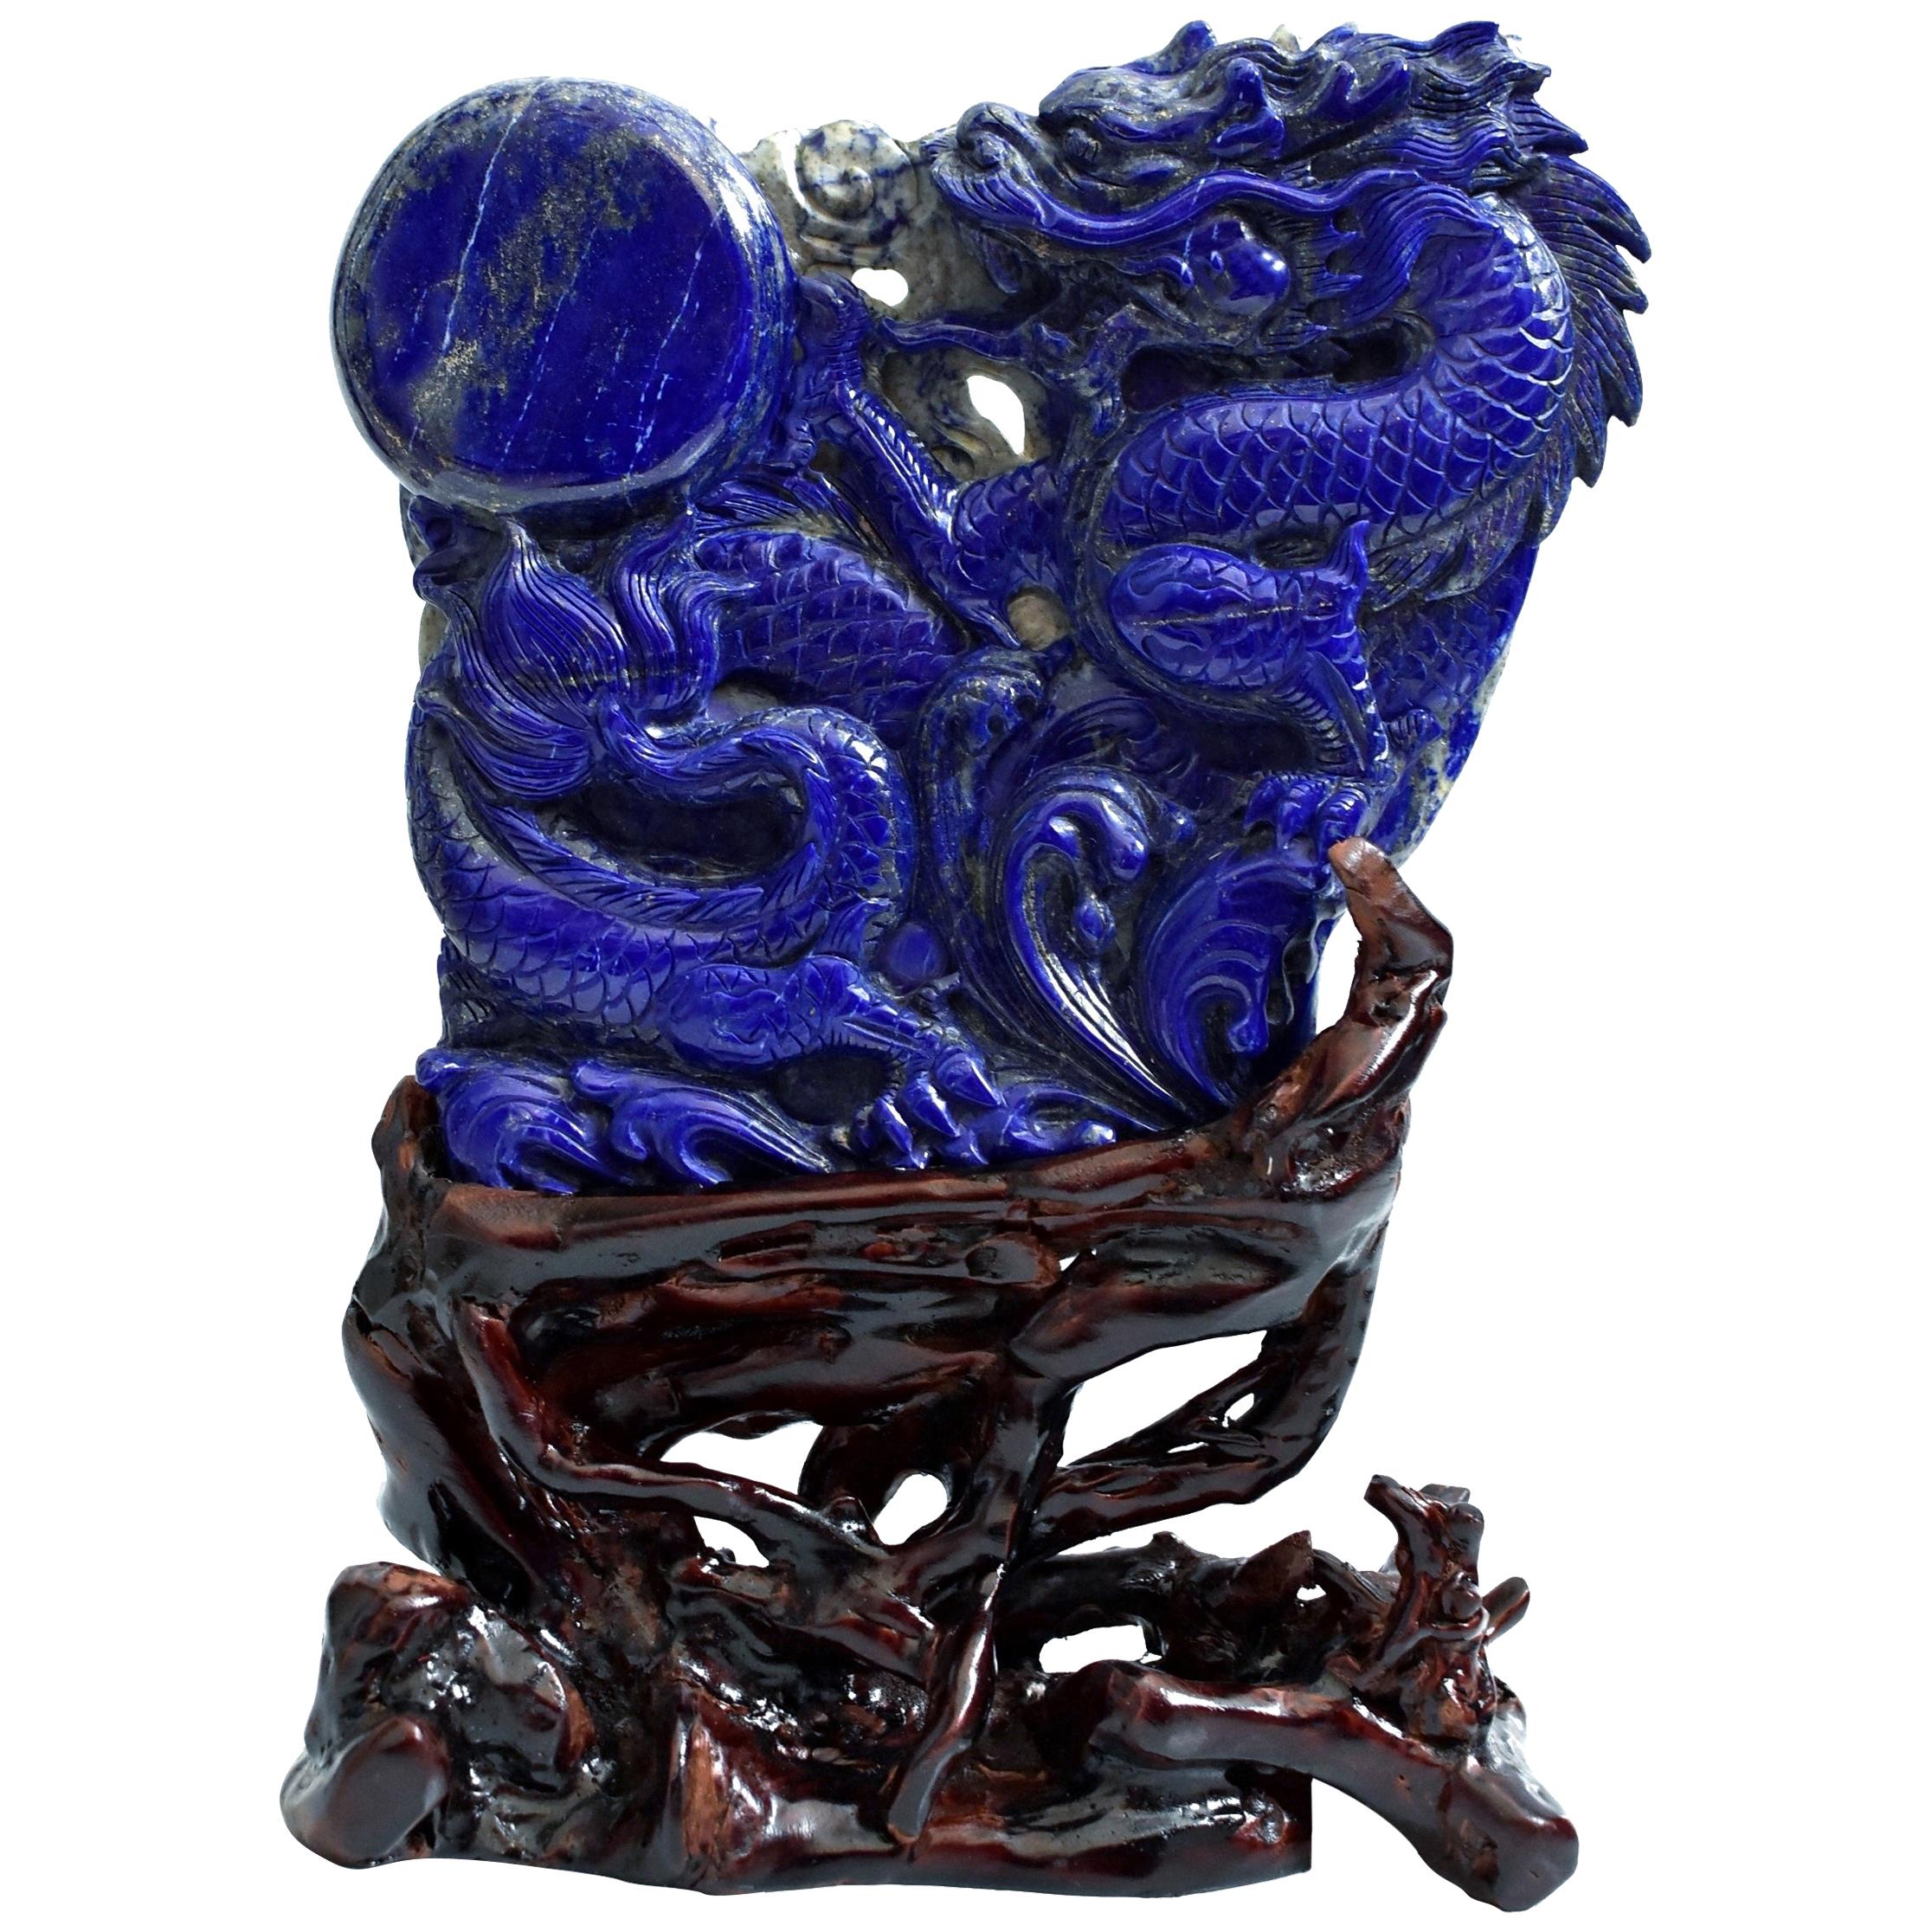 Natural Lapis Lazuli Dragon Chasing Pearl Statue, Fine Grade Hand Carved